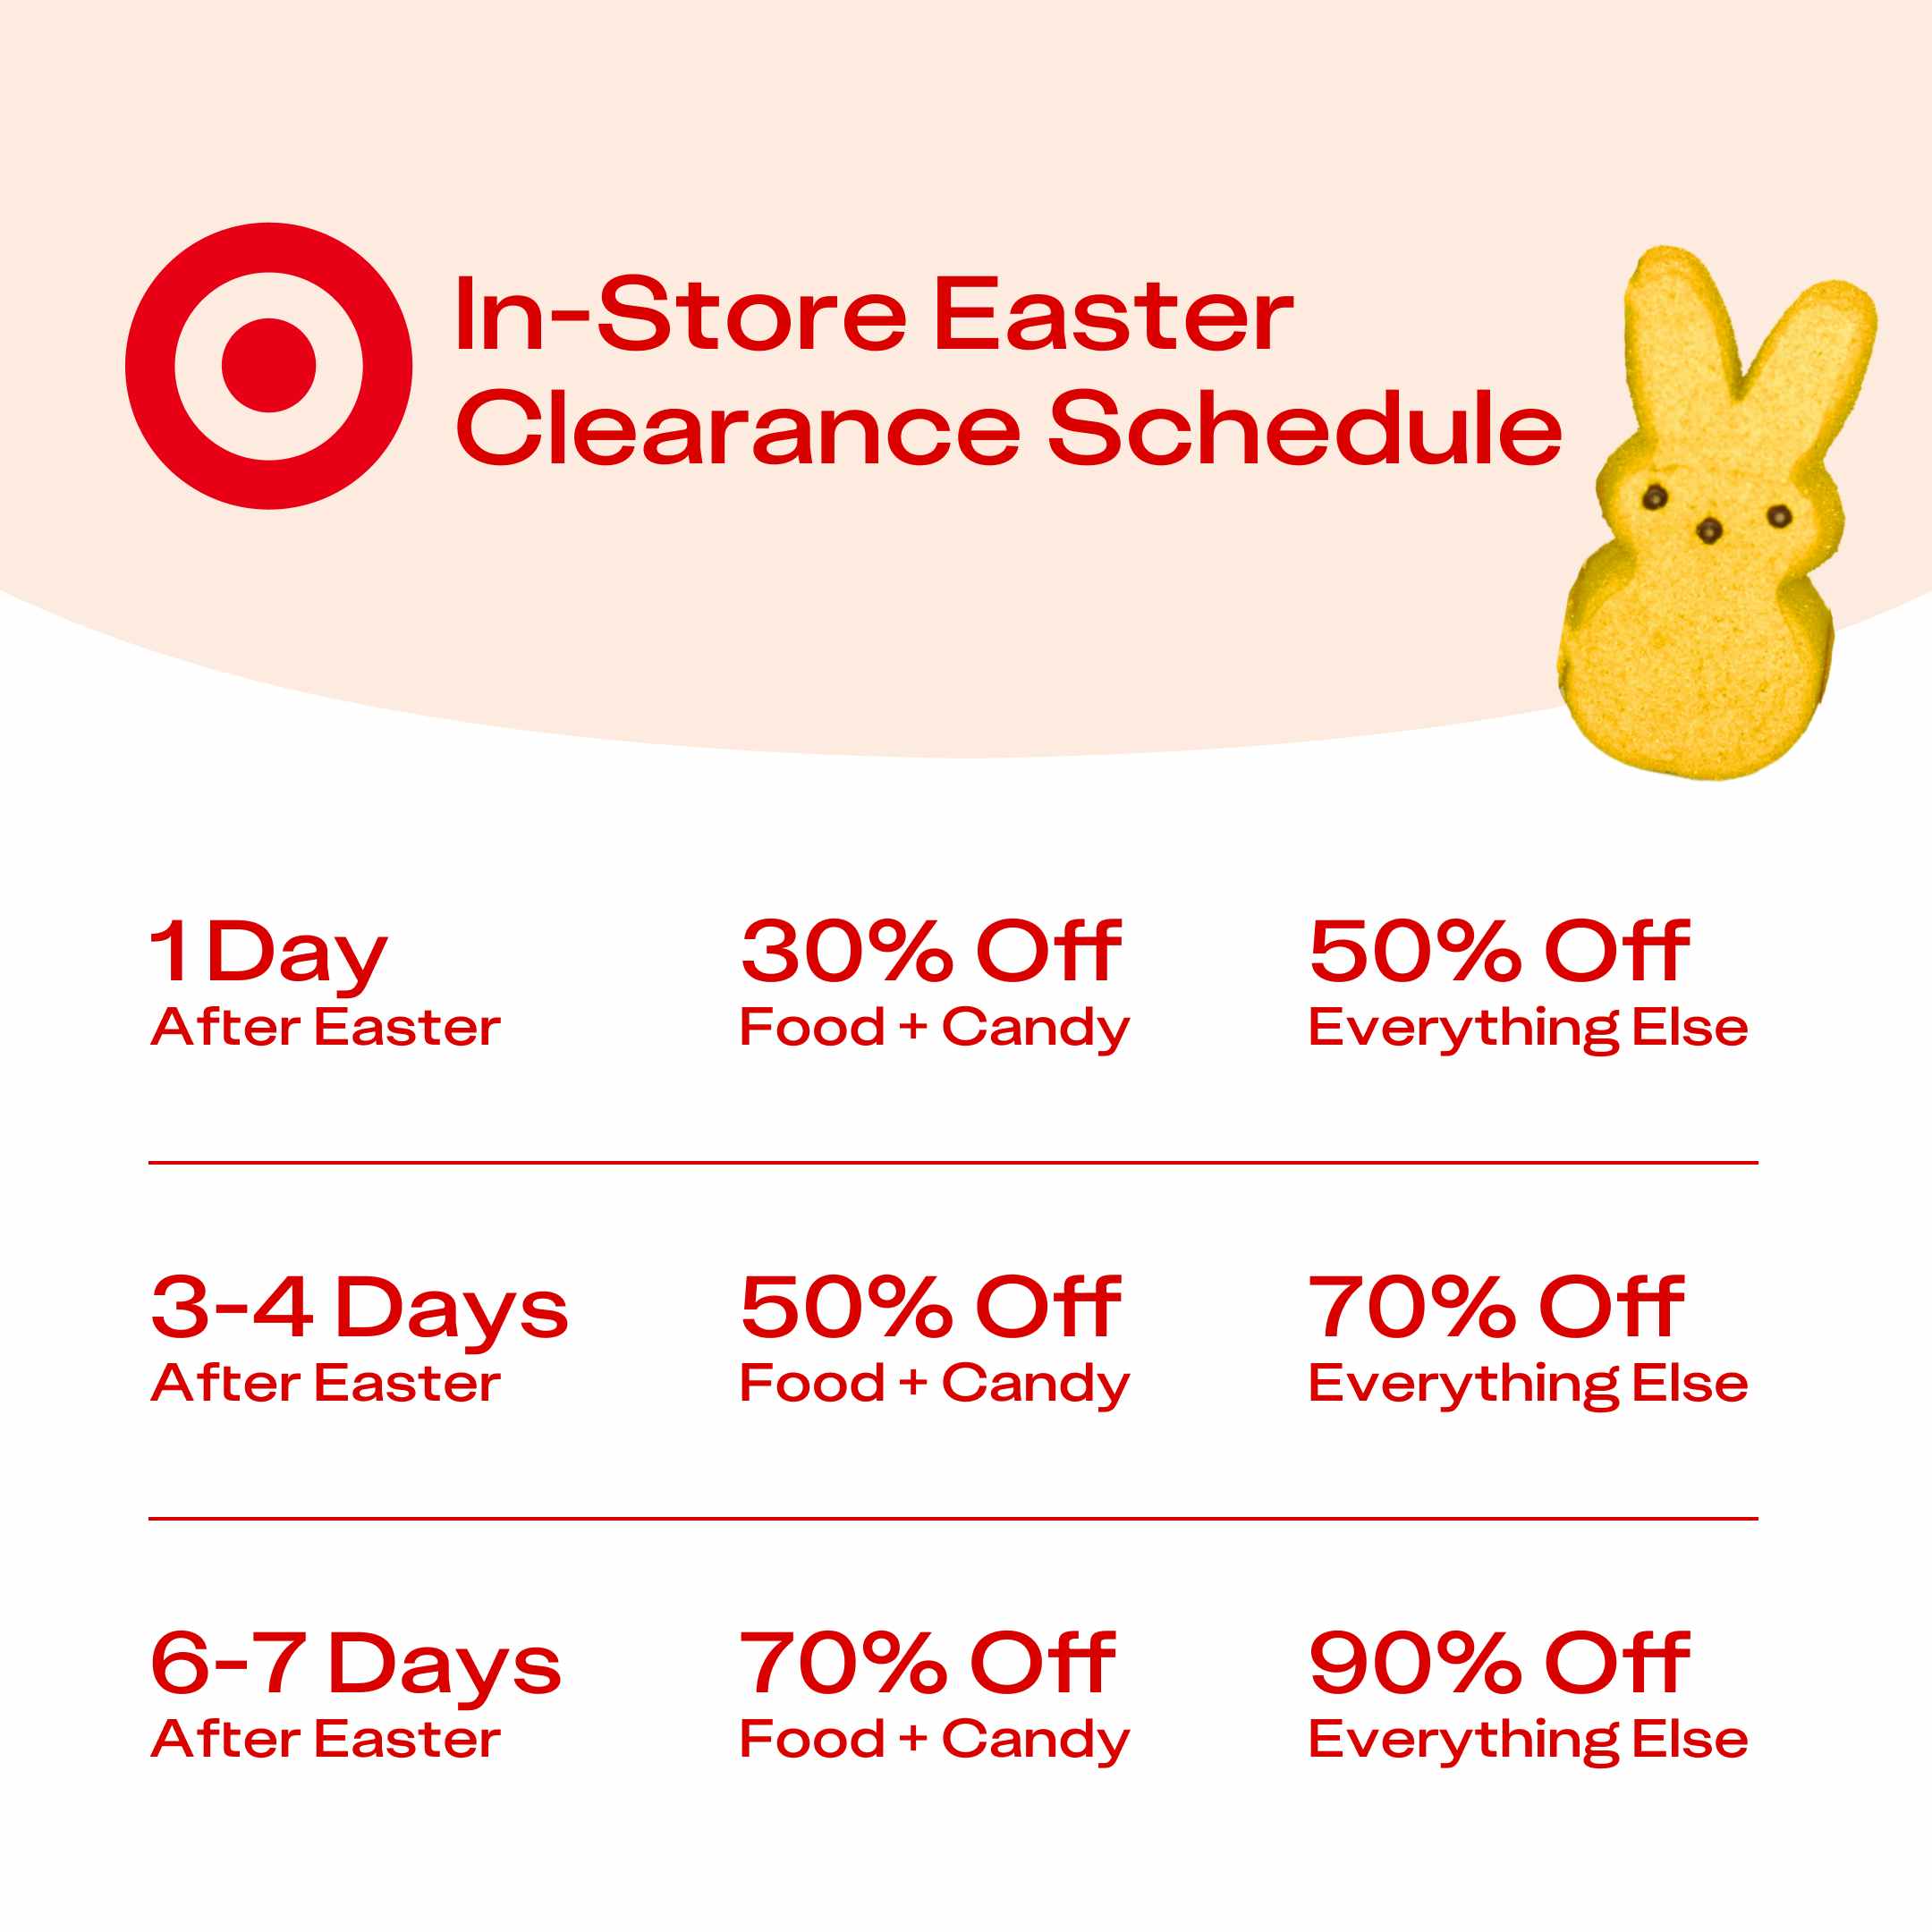 Target In-Store Easter Clearance Schedule EDIT